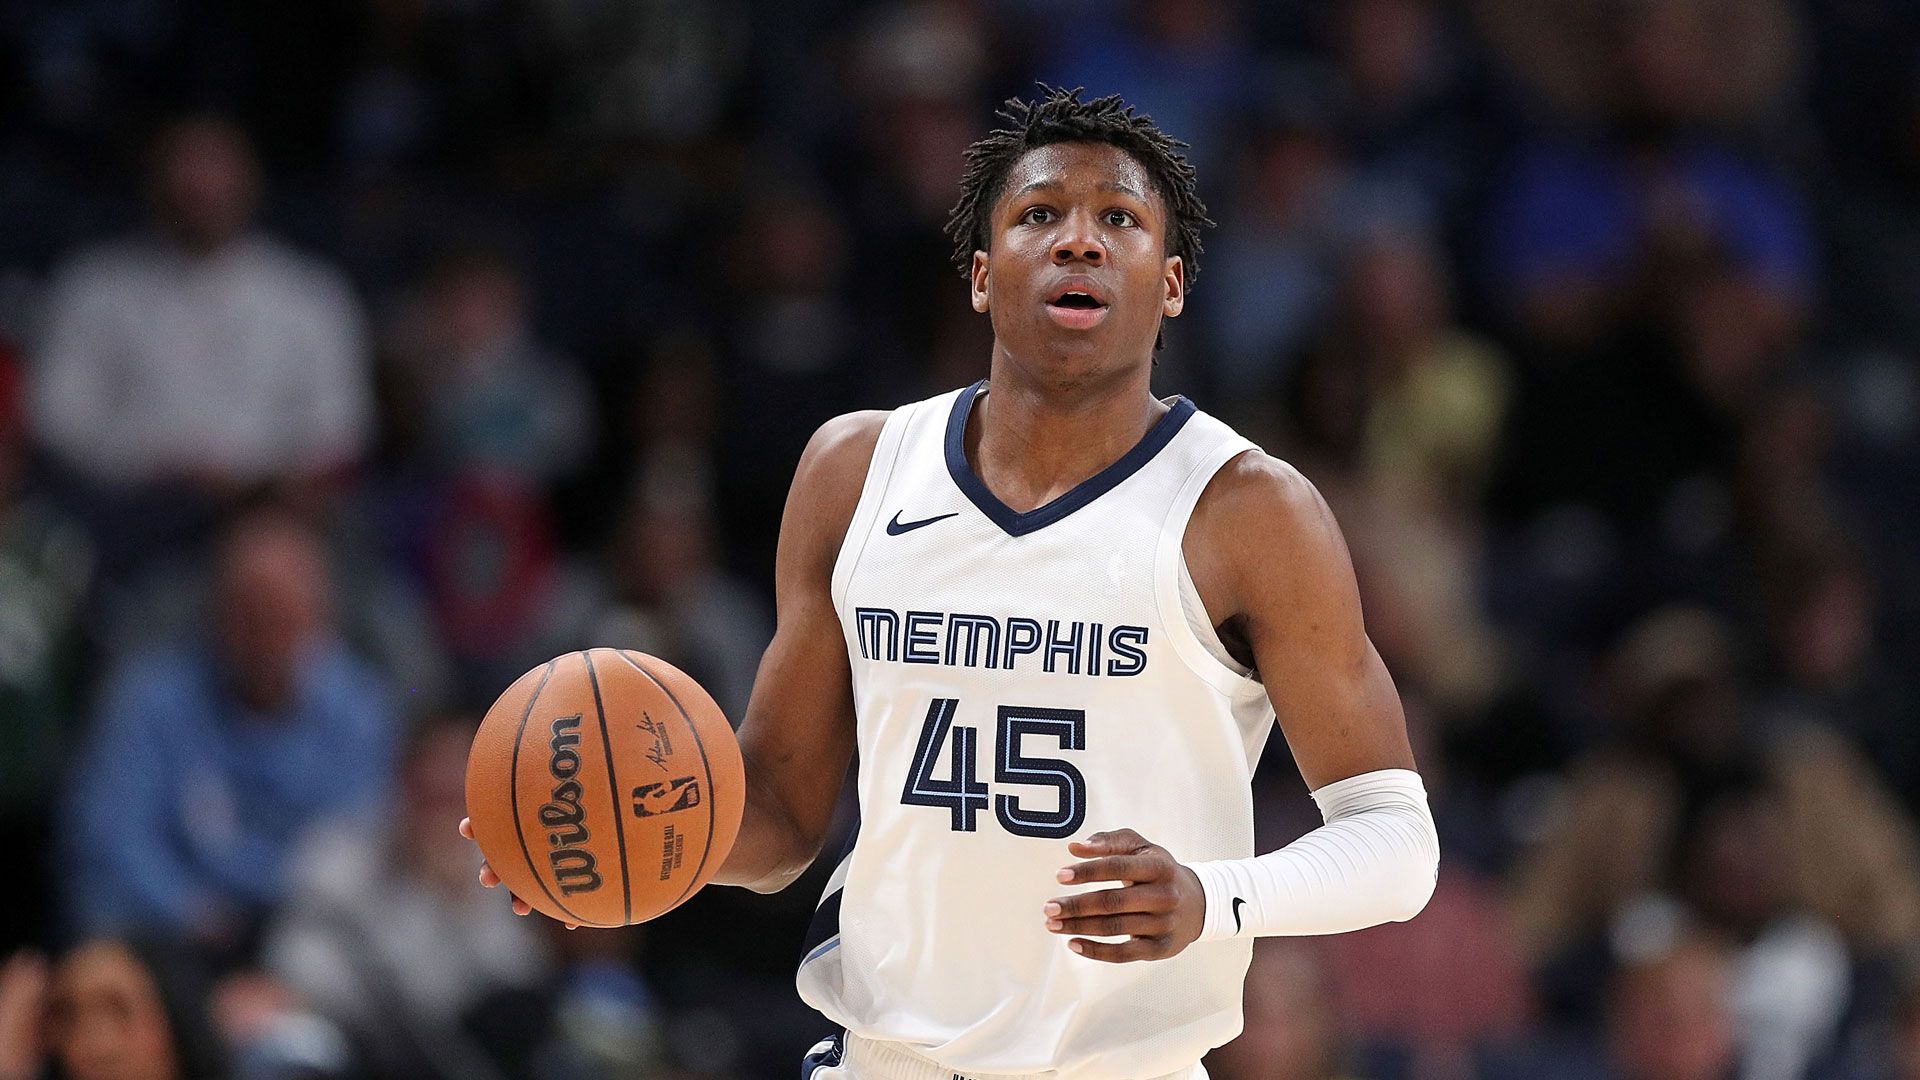 MikeCheck: Grizzlies breakout rook GG Jackson eager for next phase of NBA development